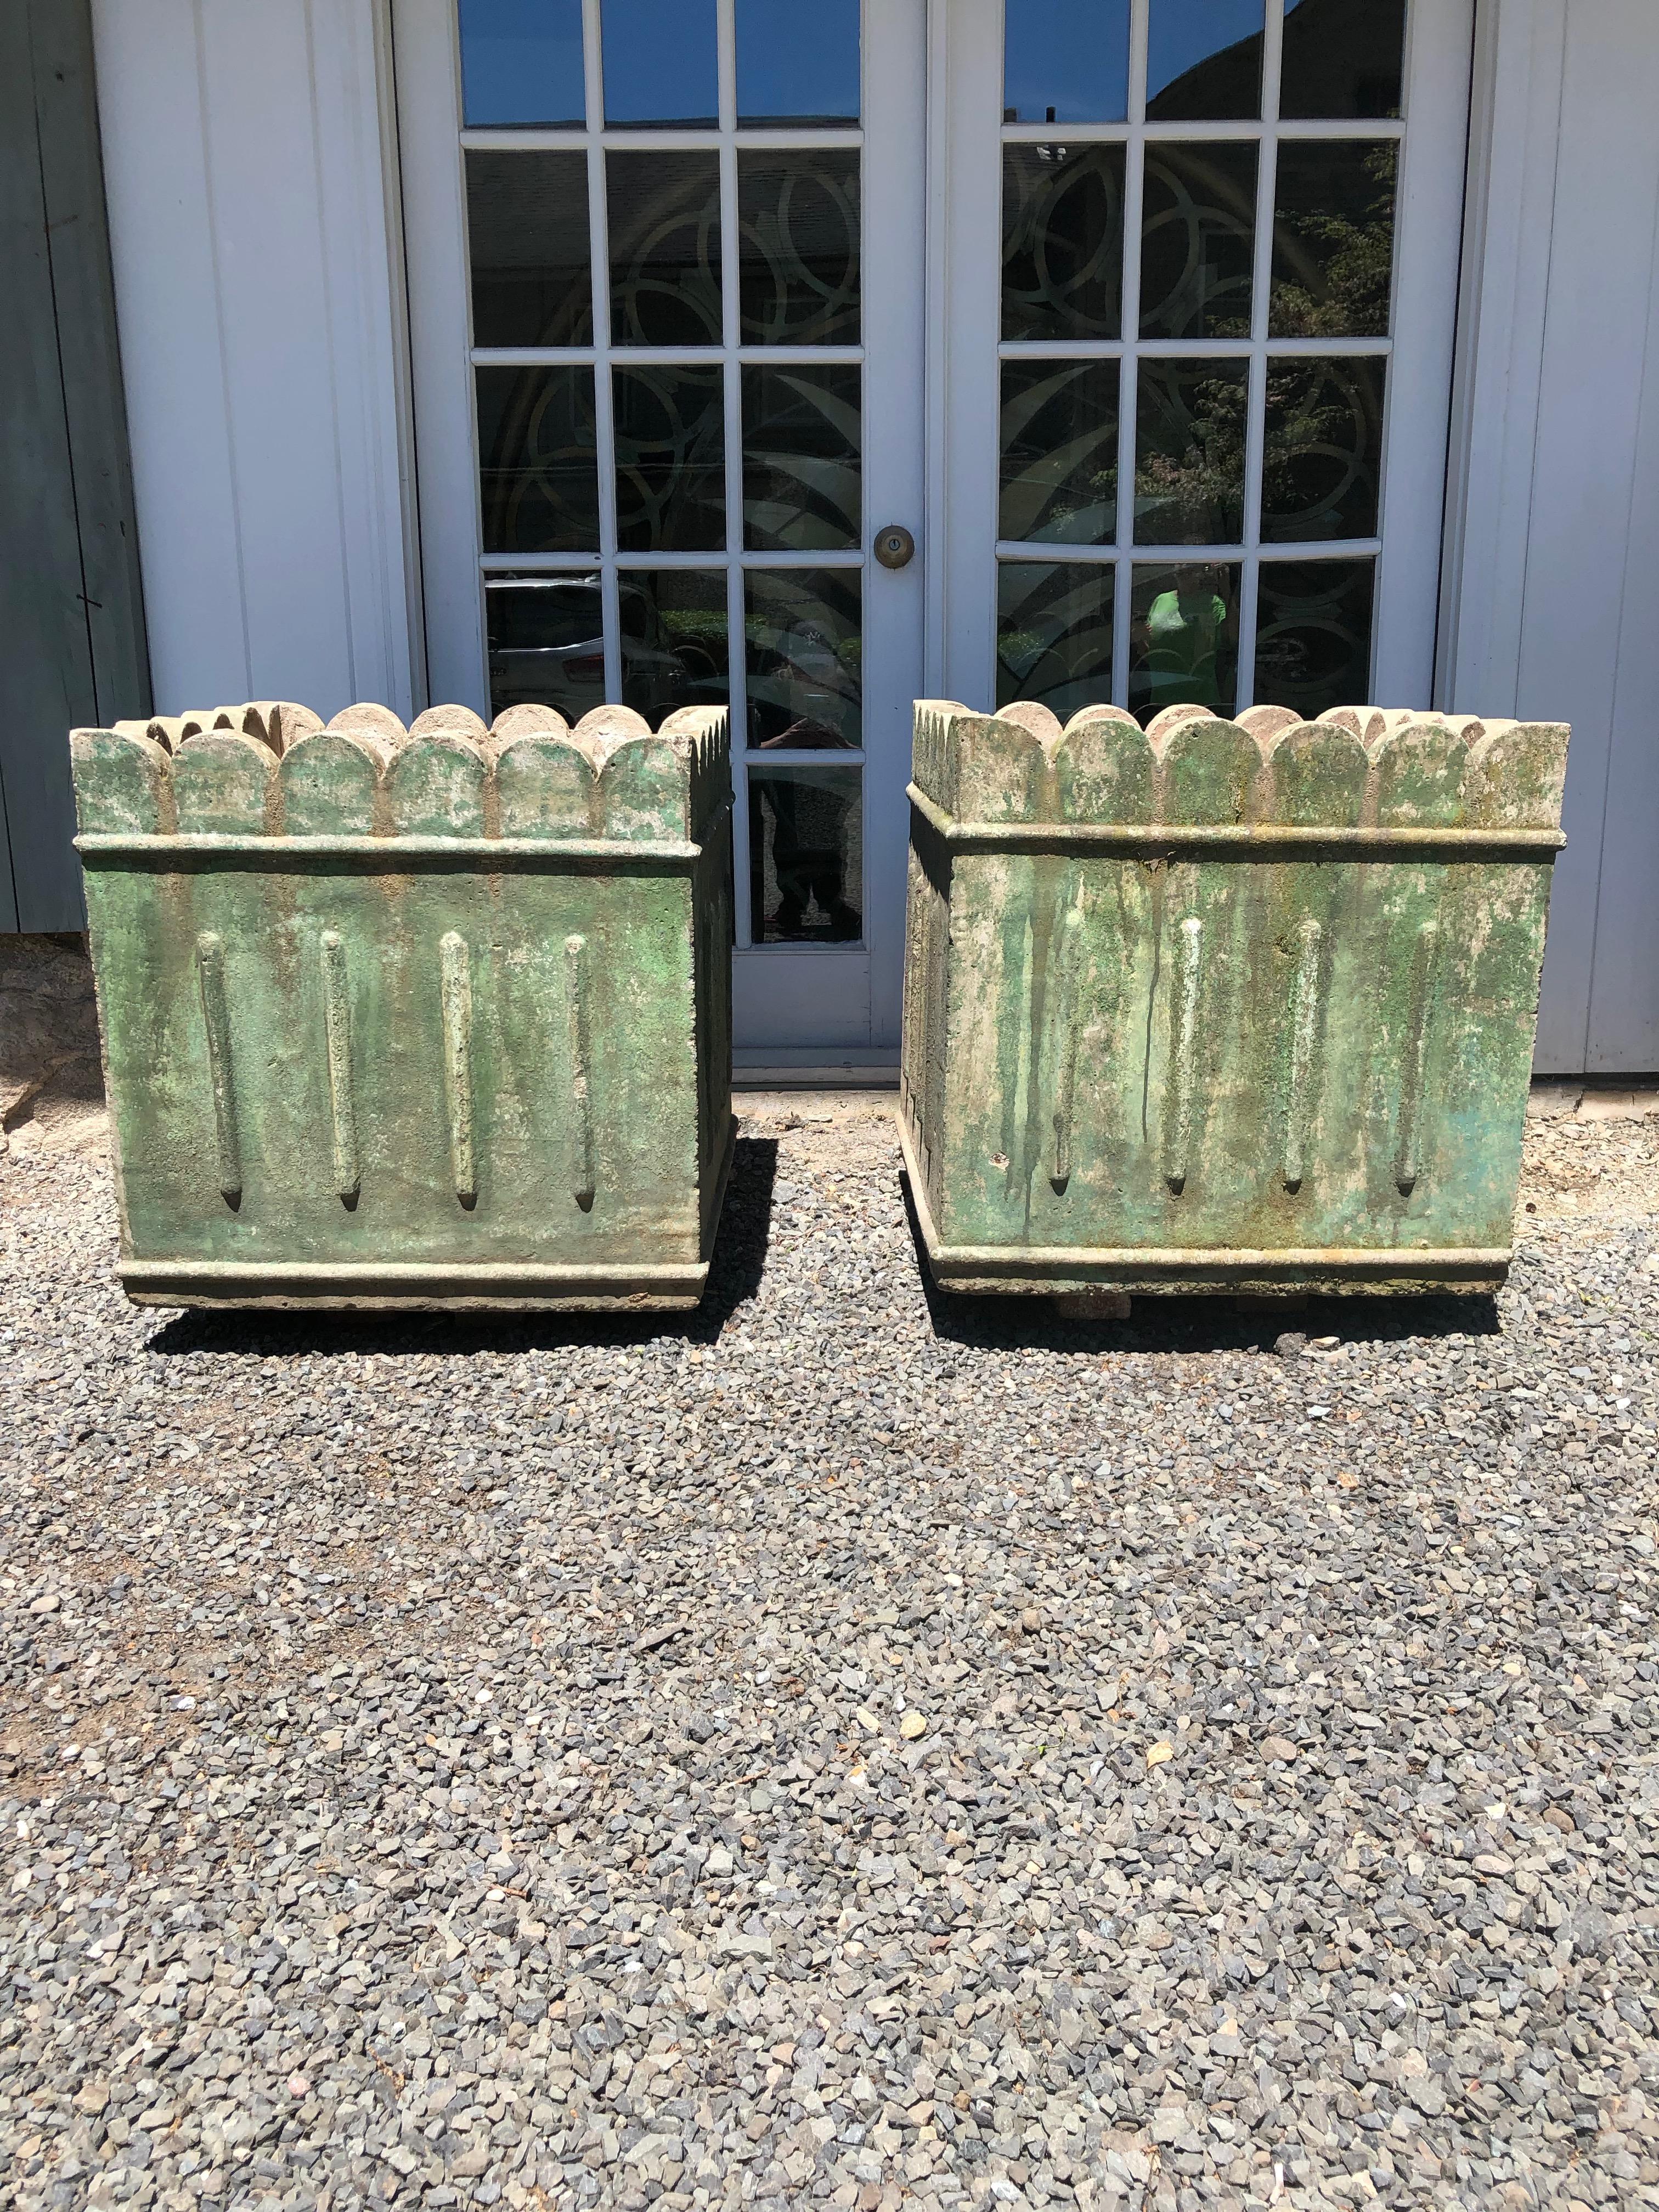 We’ve never seen this form of planter before and they make an impressive statement indeed! Sculpted from concrete over an iron armature, these have good age and their commodious planting wells, each with four drain holes, will allow you to plant